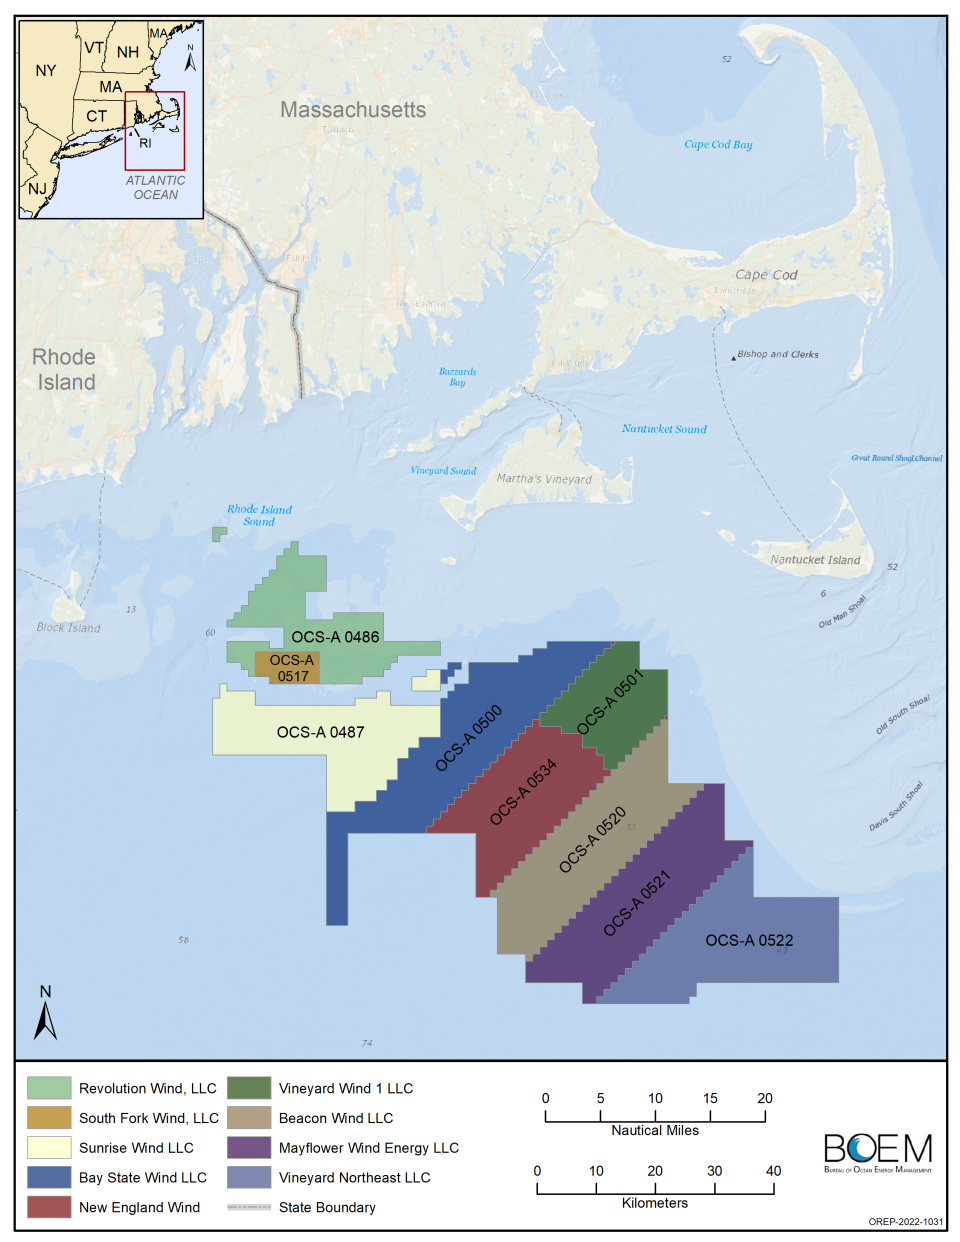 This map shows the offshore wind lease areas off the Massachusetts and Rhode Island coasts.